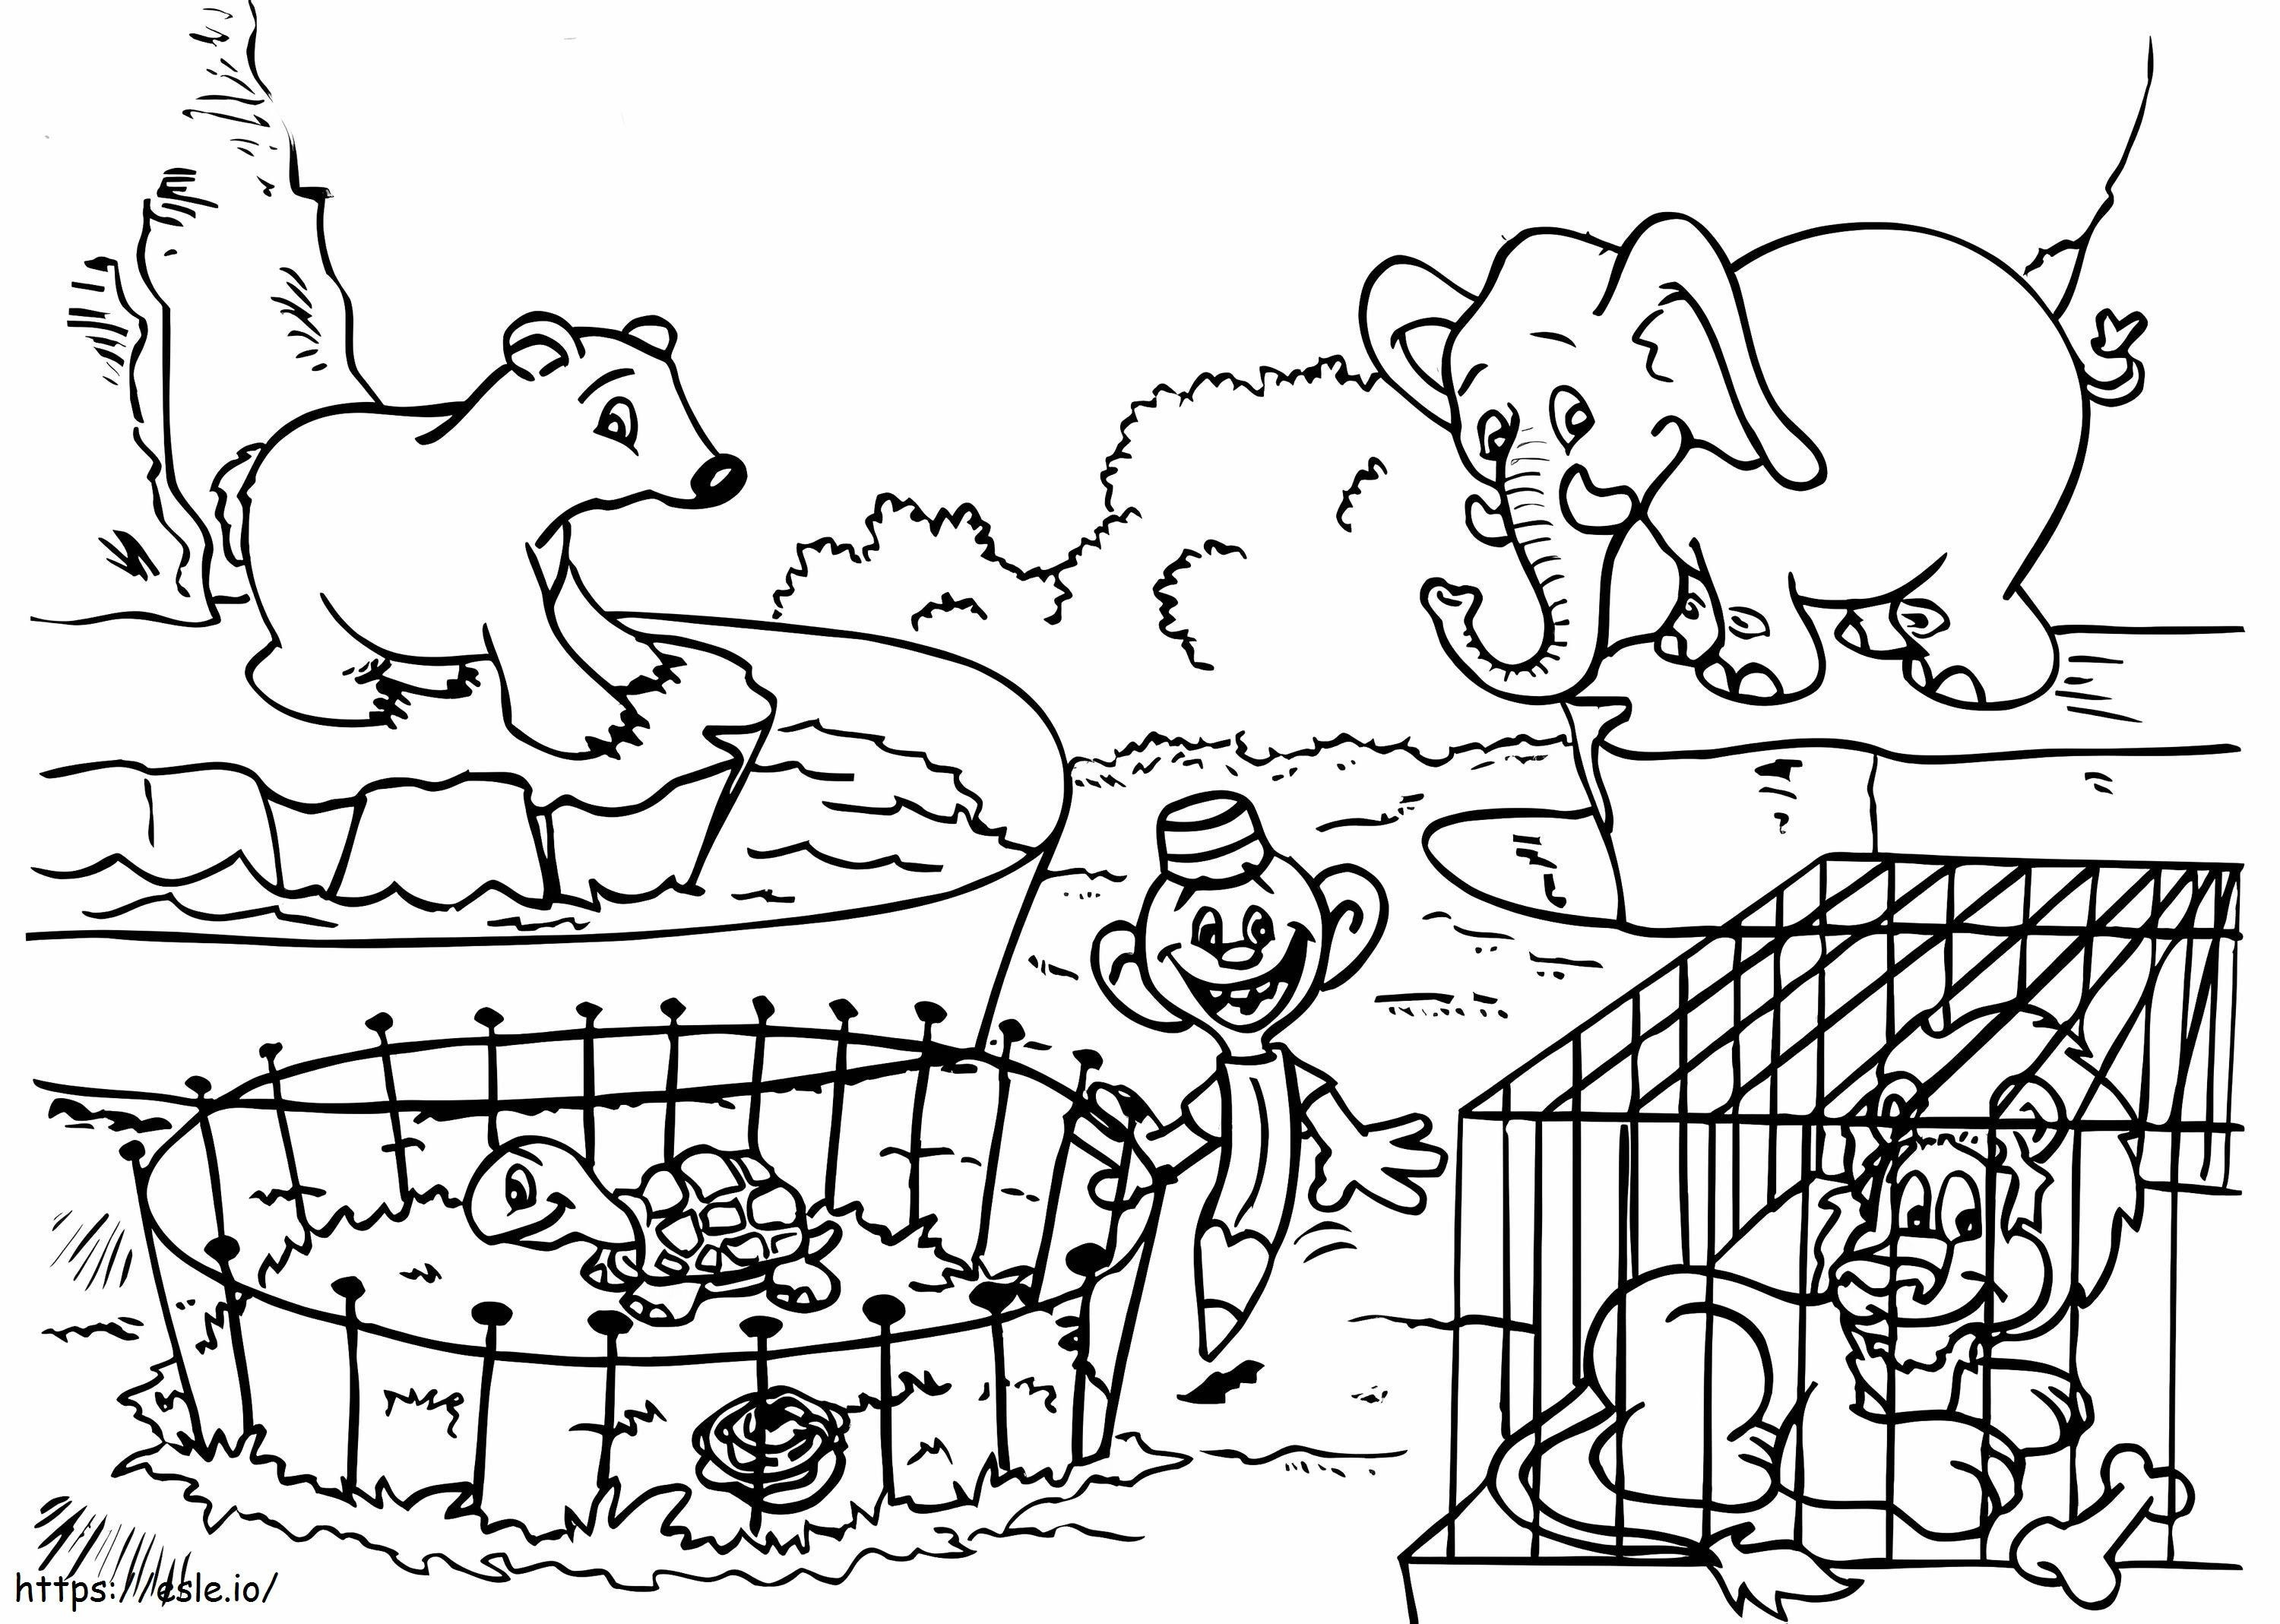 Physical Zoological Animal coloring page